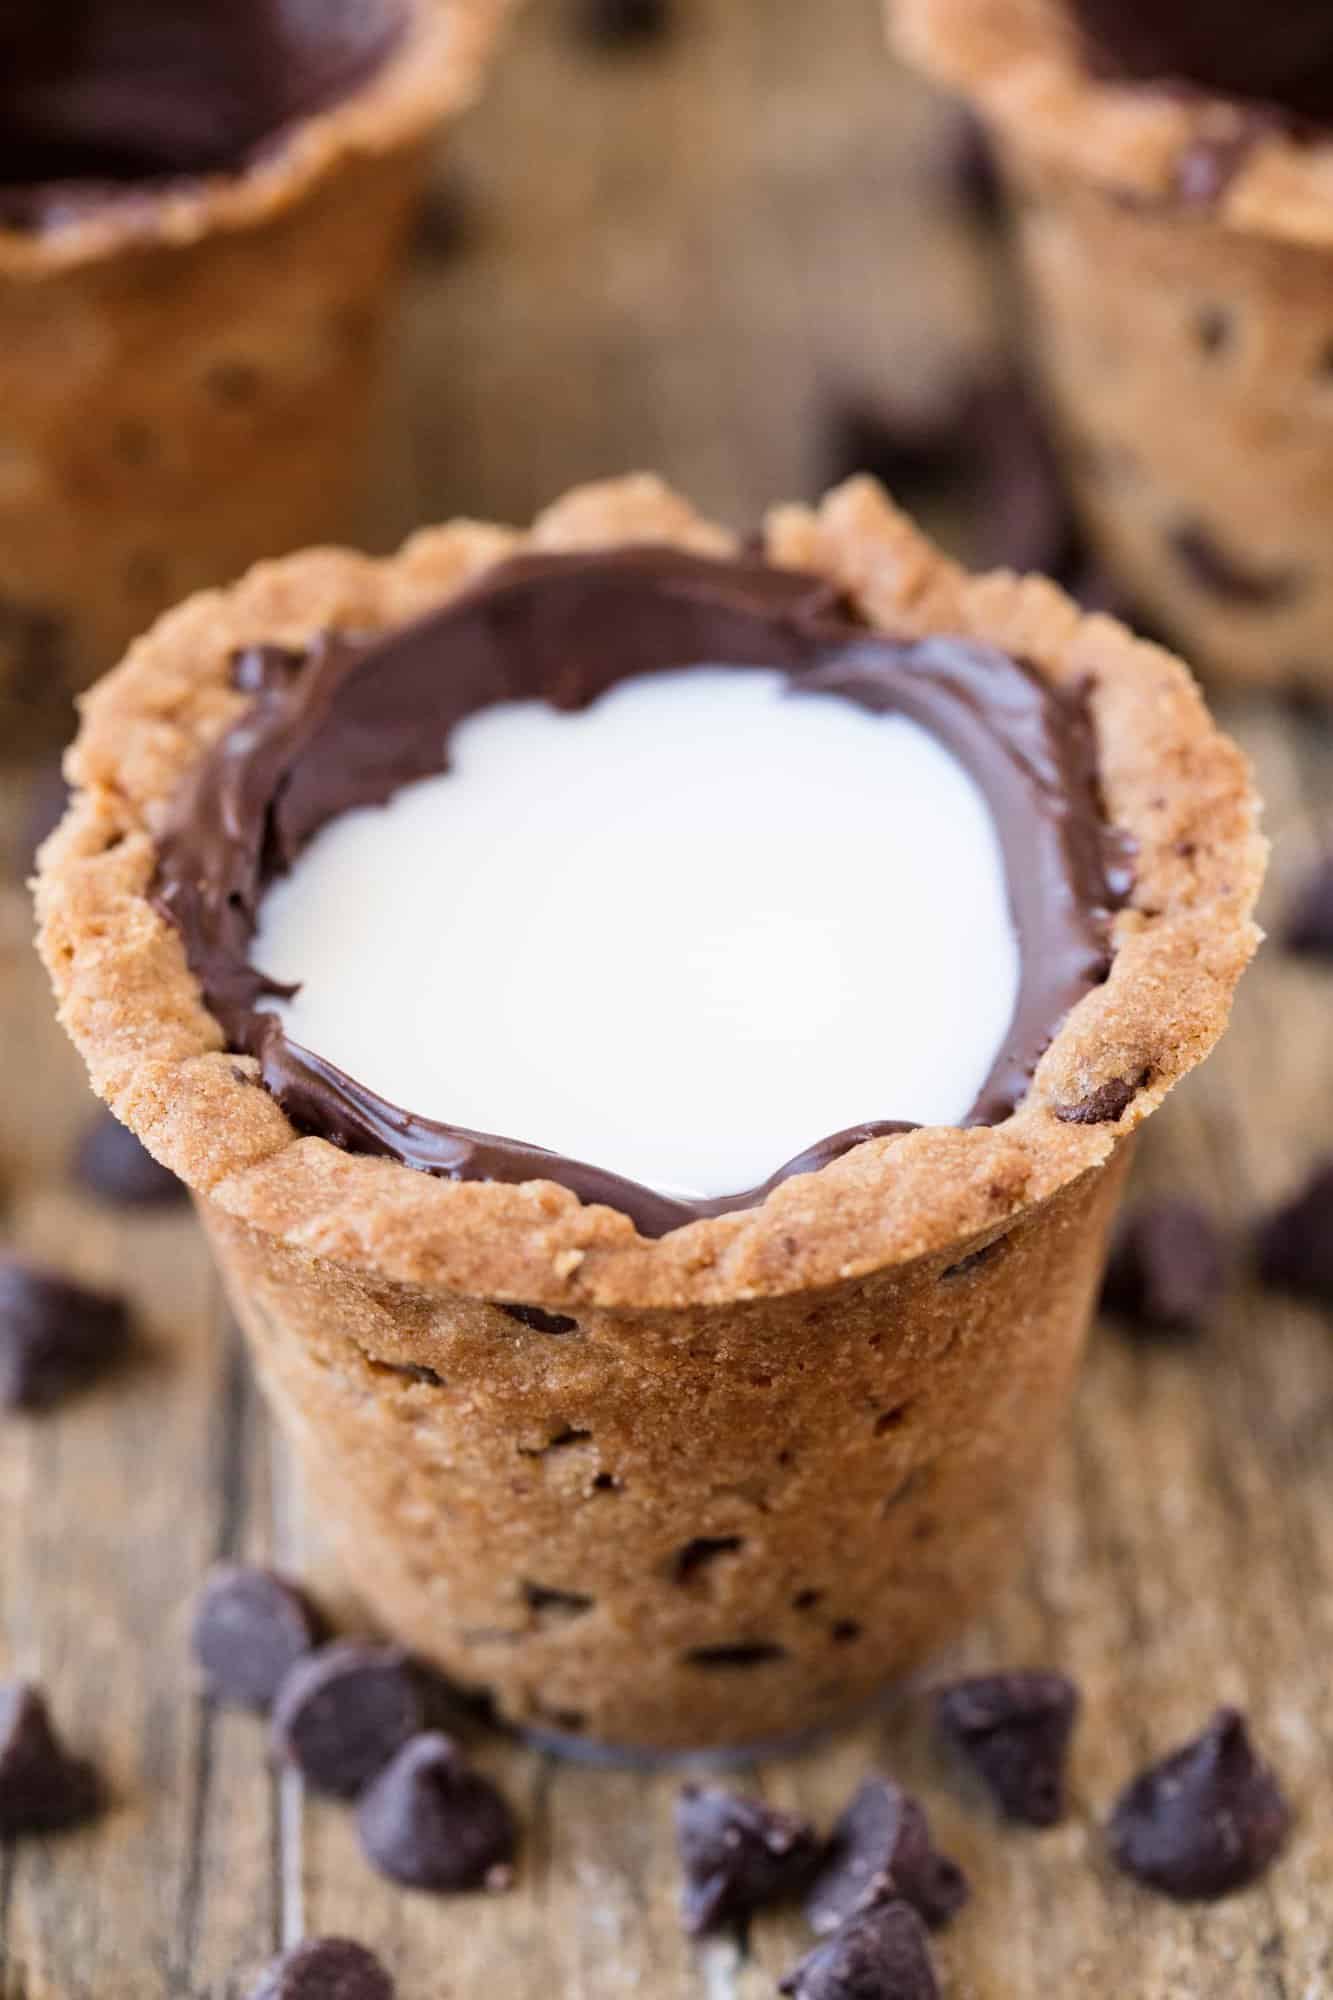 Drink your milk and cookies straight from a Chocolate Chip Cookie Shot glass! This fun dessert makes for a great party food. So much fun!